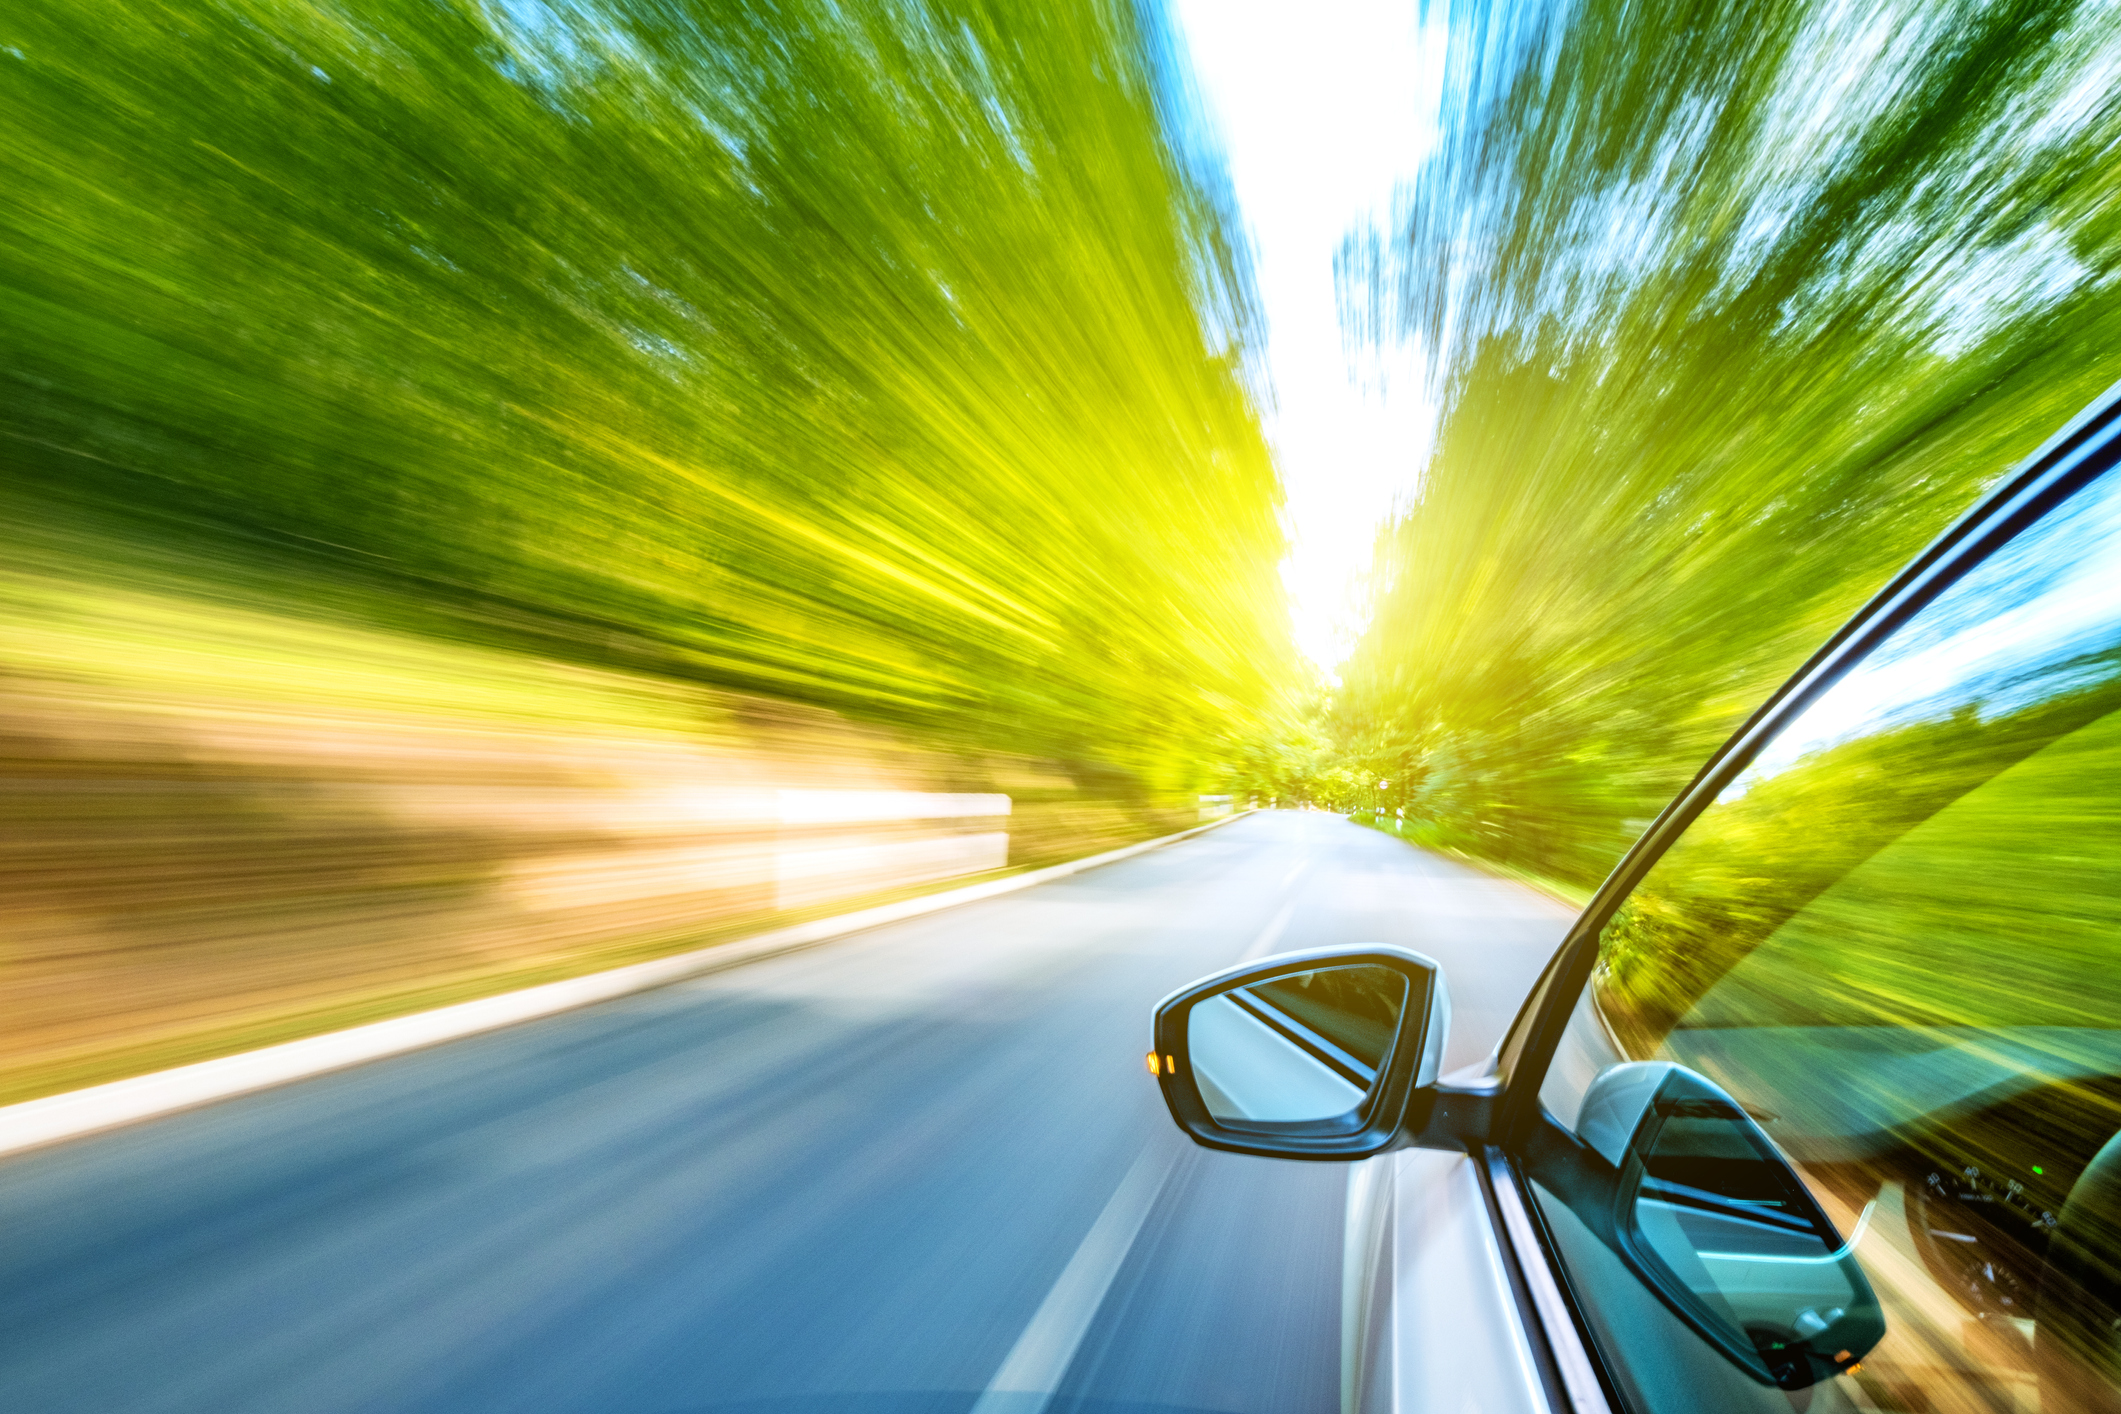 Find your advisor's fast lane for client lead generation